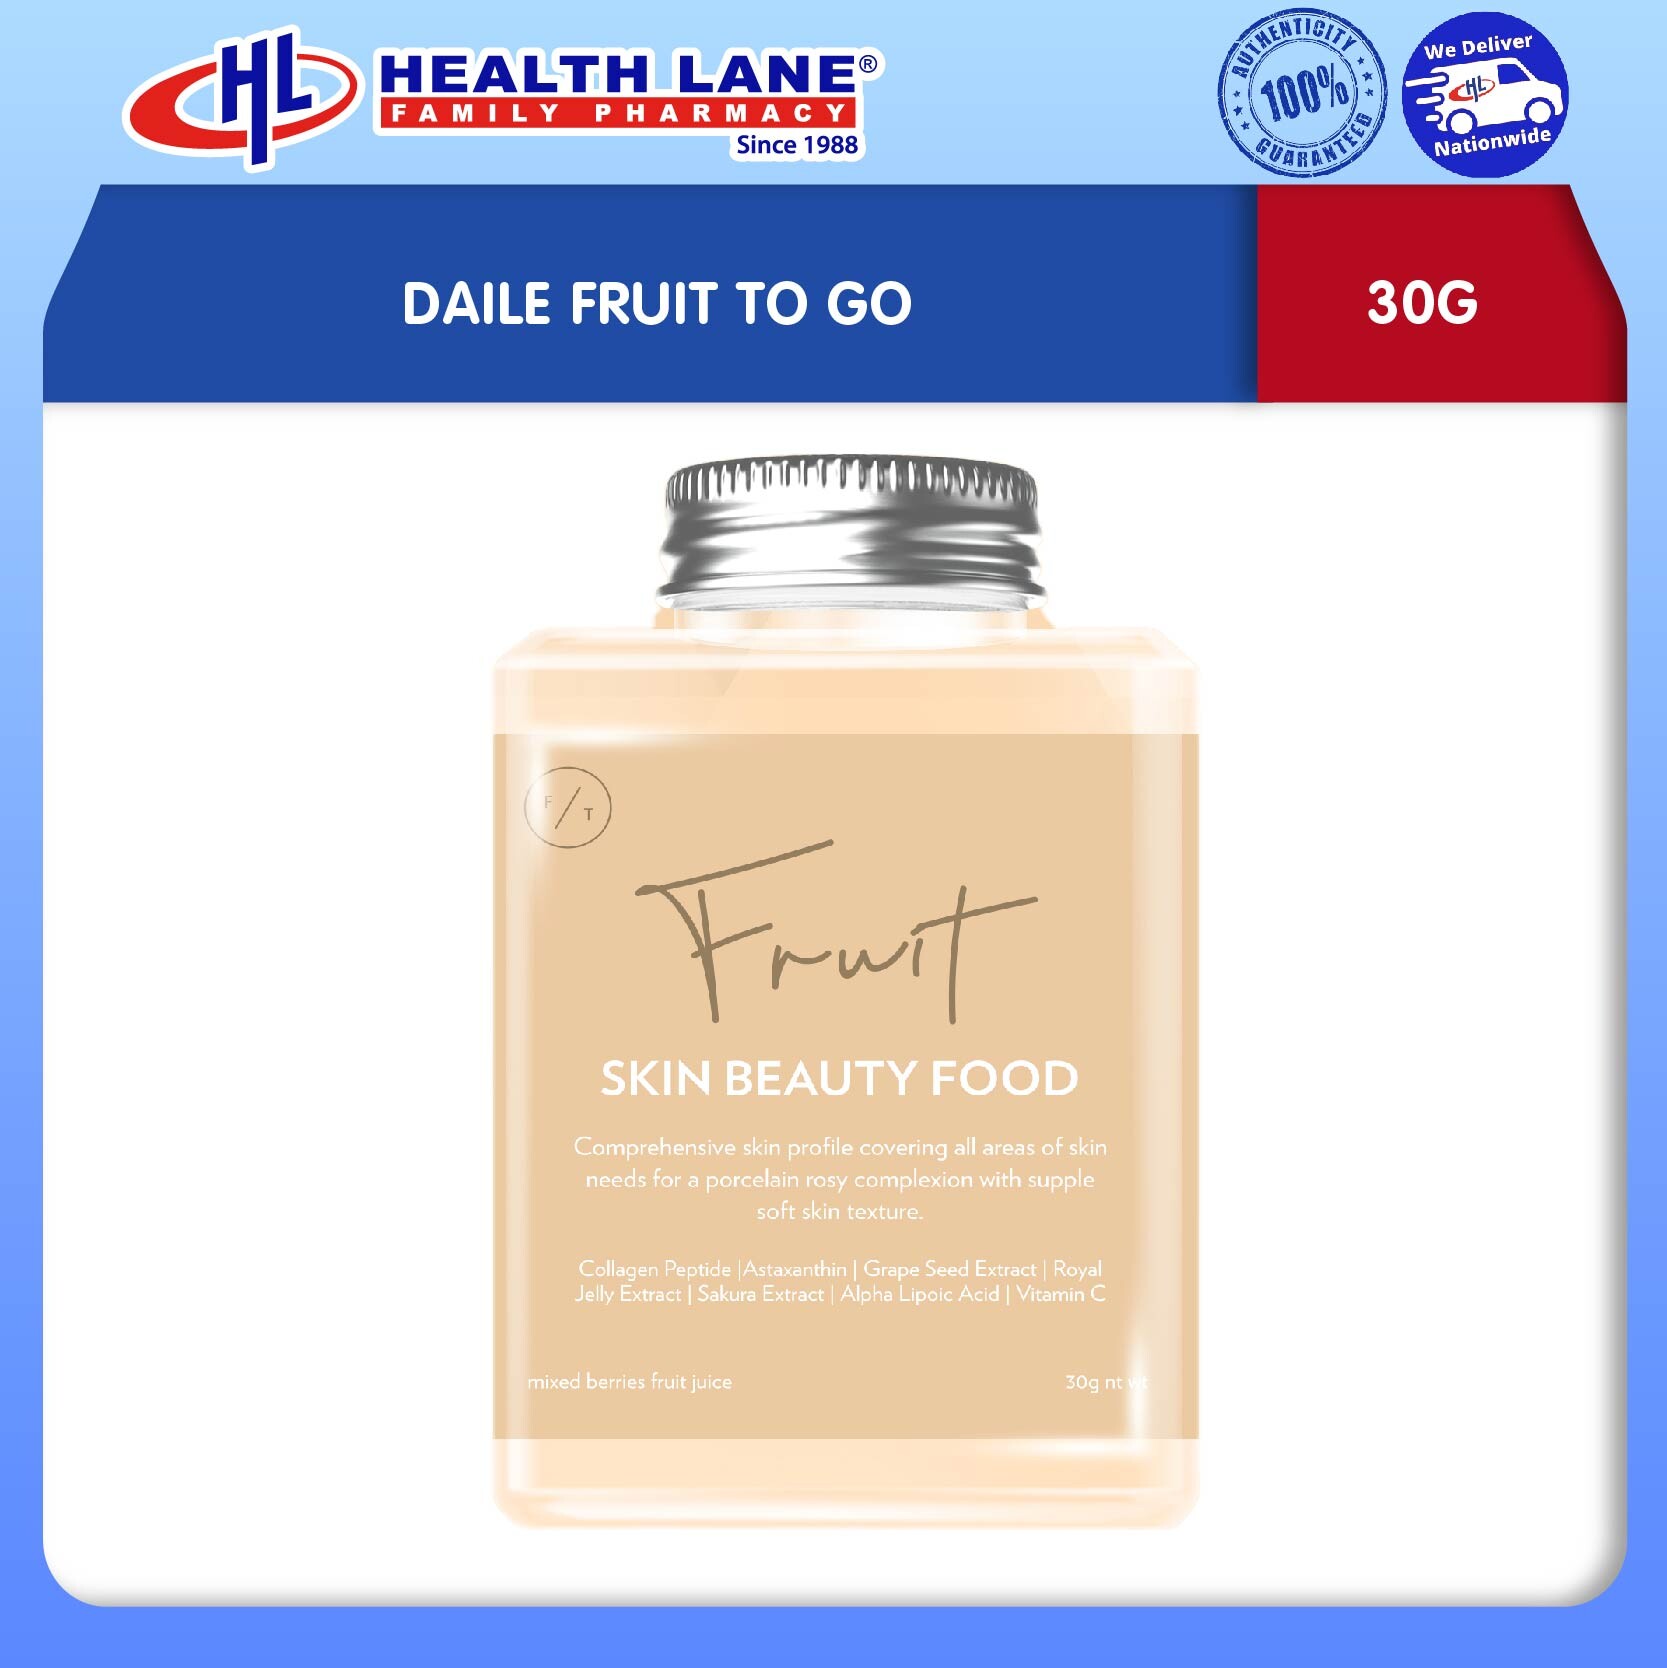 DAILE FRUIT TO GO (30G)